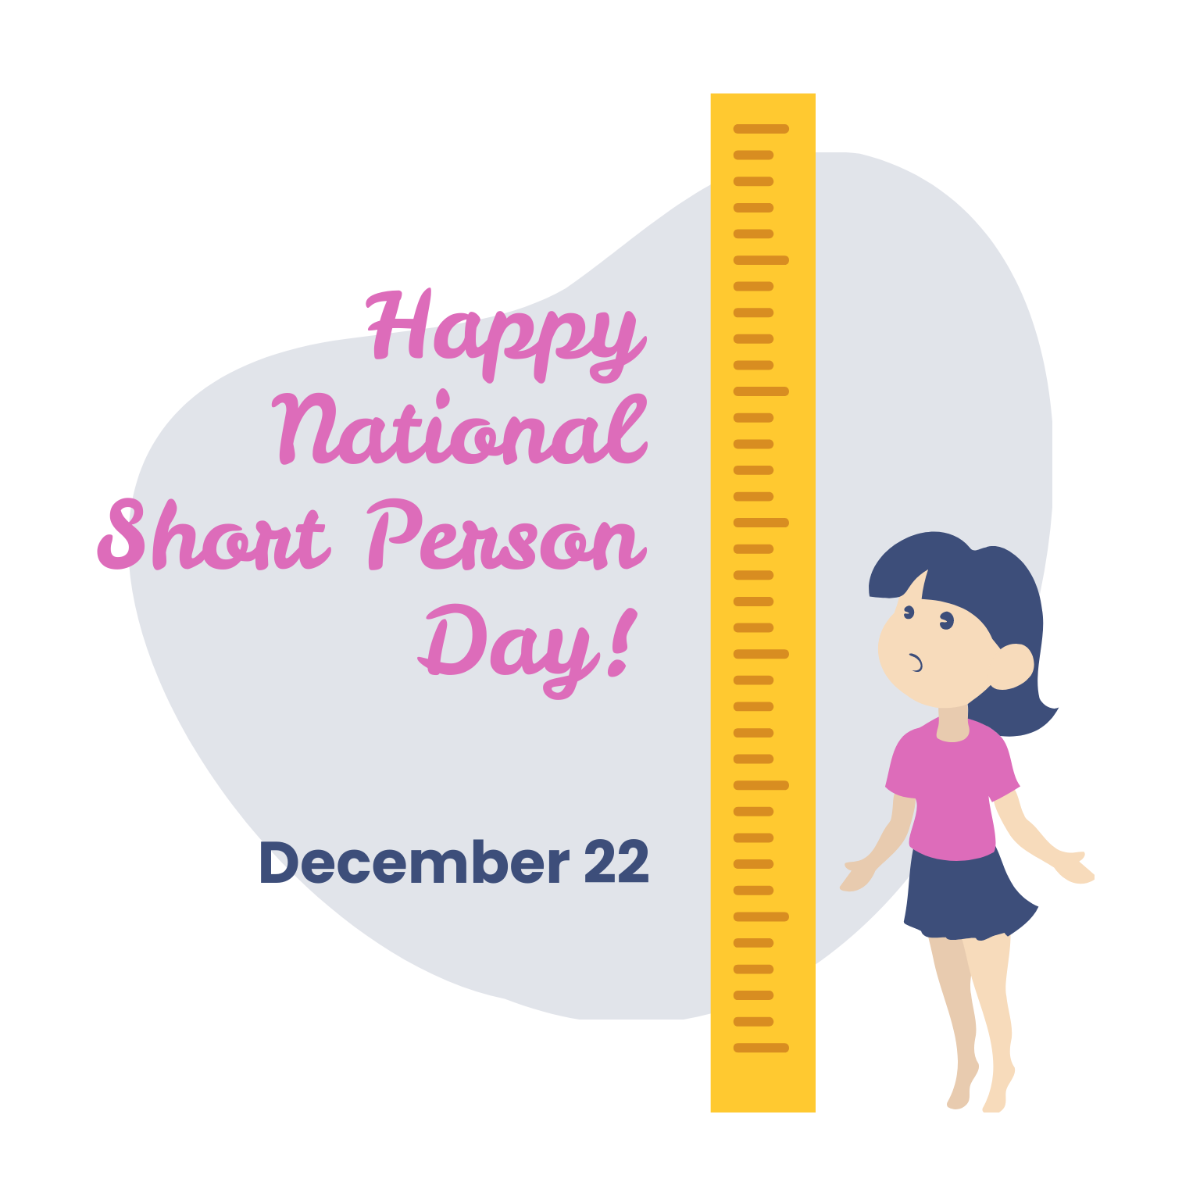 Free National Short Person Day Flyer Vector Template